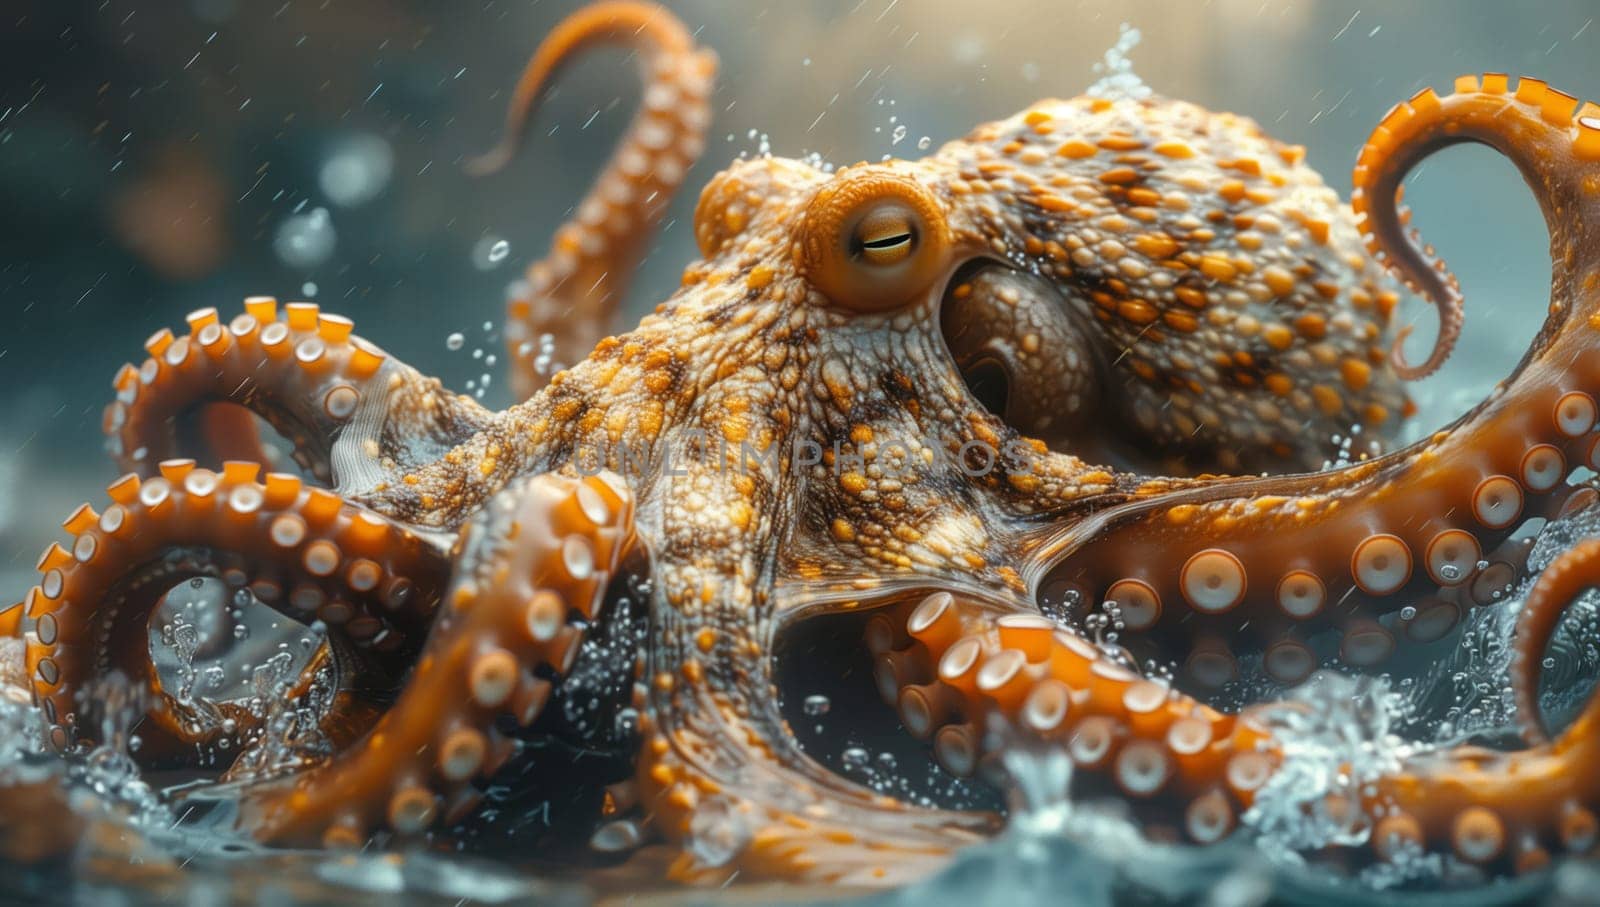 A giant Pacific octopus, a marine organism, is swimming underwater. Octopuses are marine invertebrates studied in marine biology